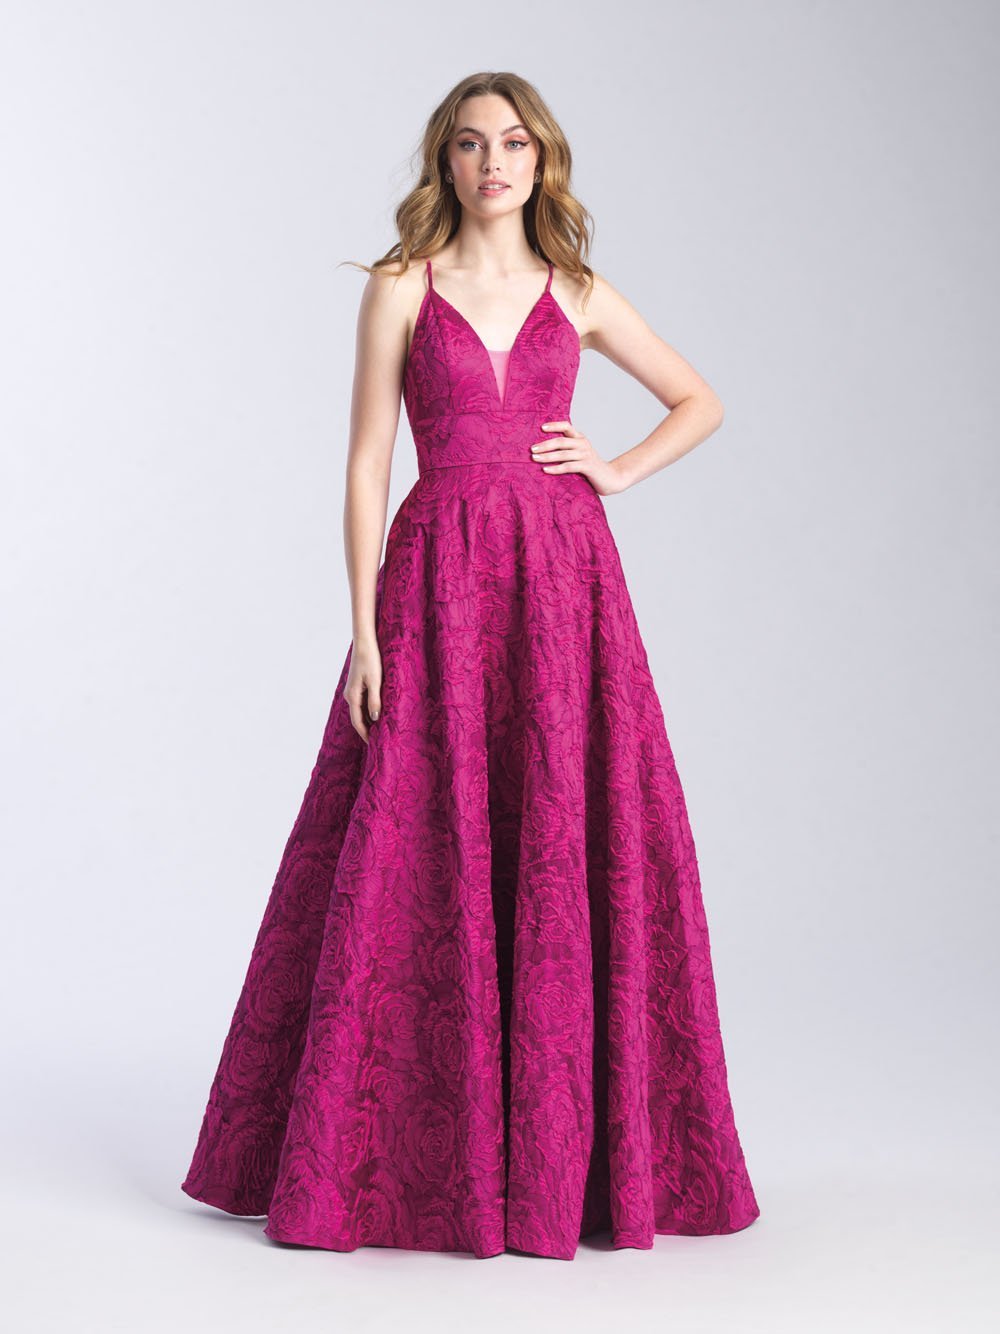 Madison James 20-316 dress images in these colors: Silver, Purple, Fuchsia.